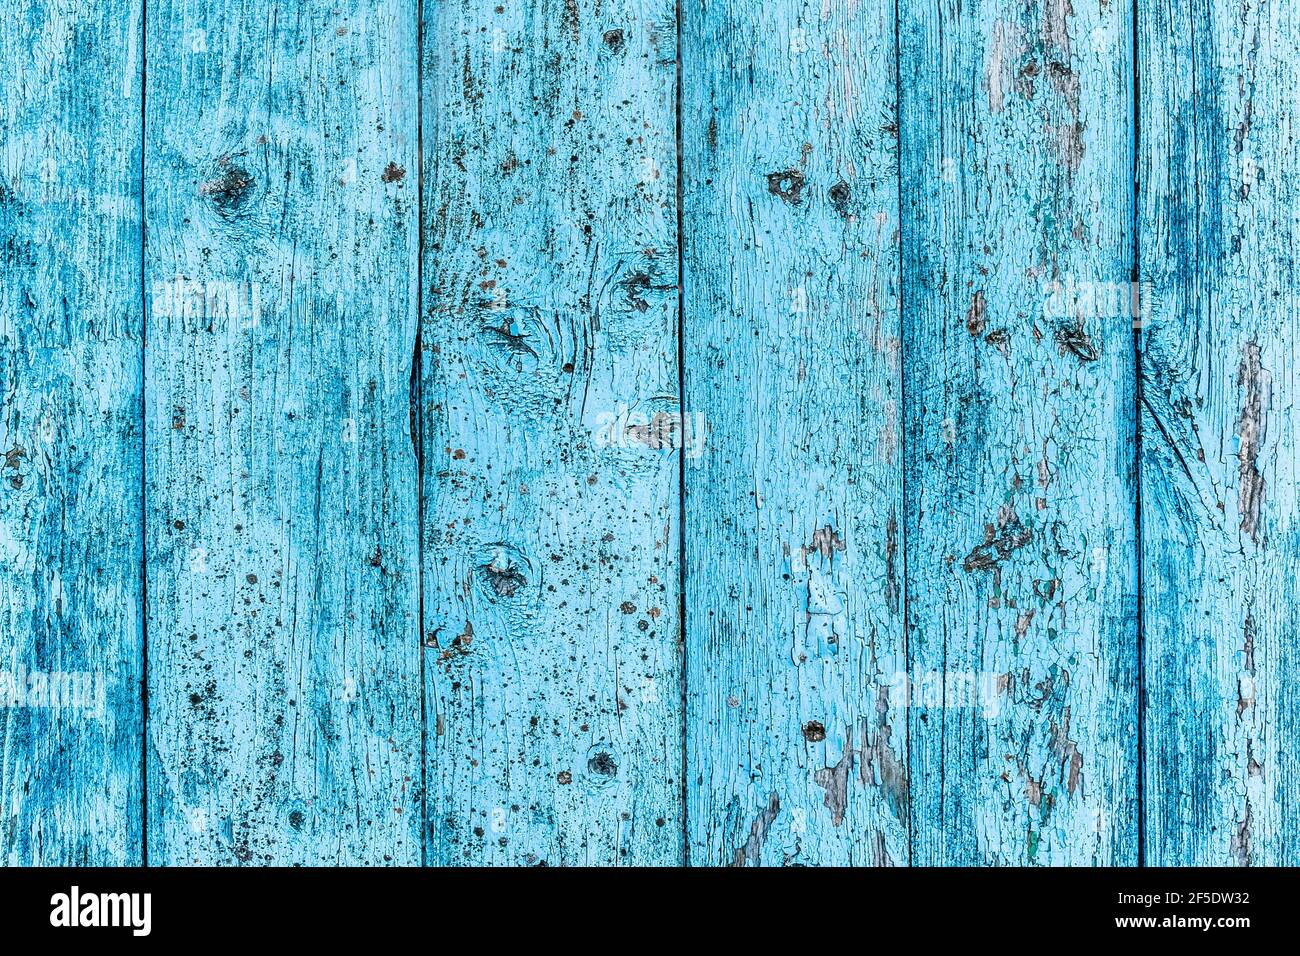 Seamless texture of old wooden fence with blue peeling paint, abstract plank background. Stock Photo